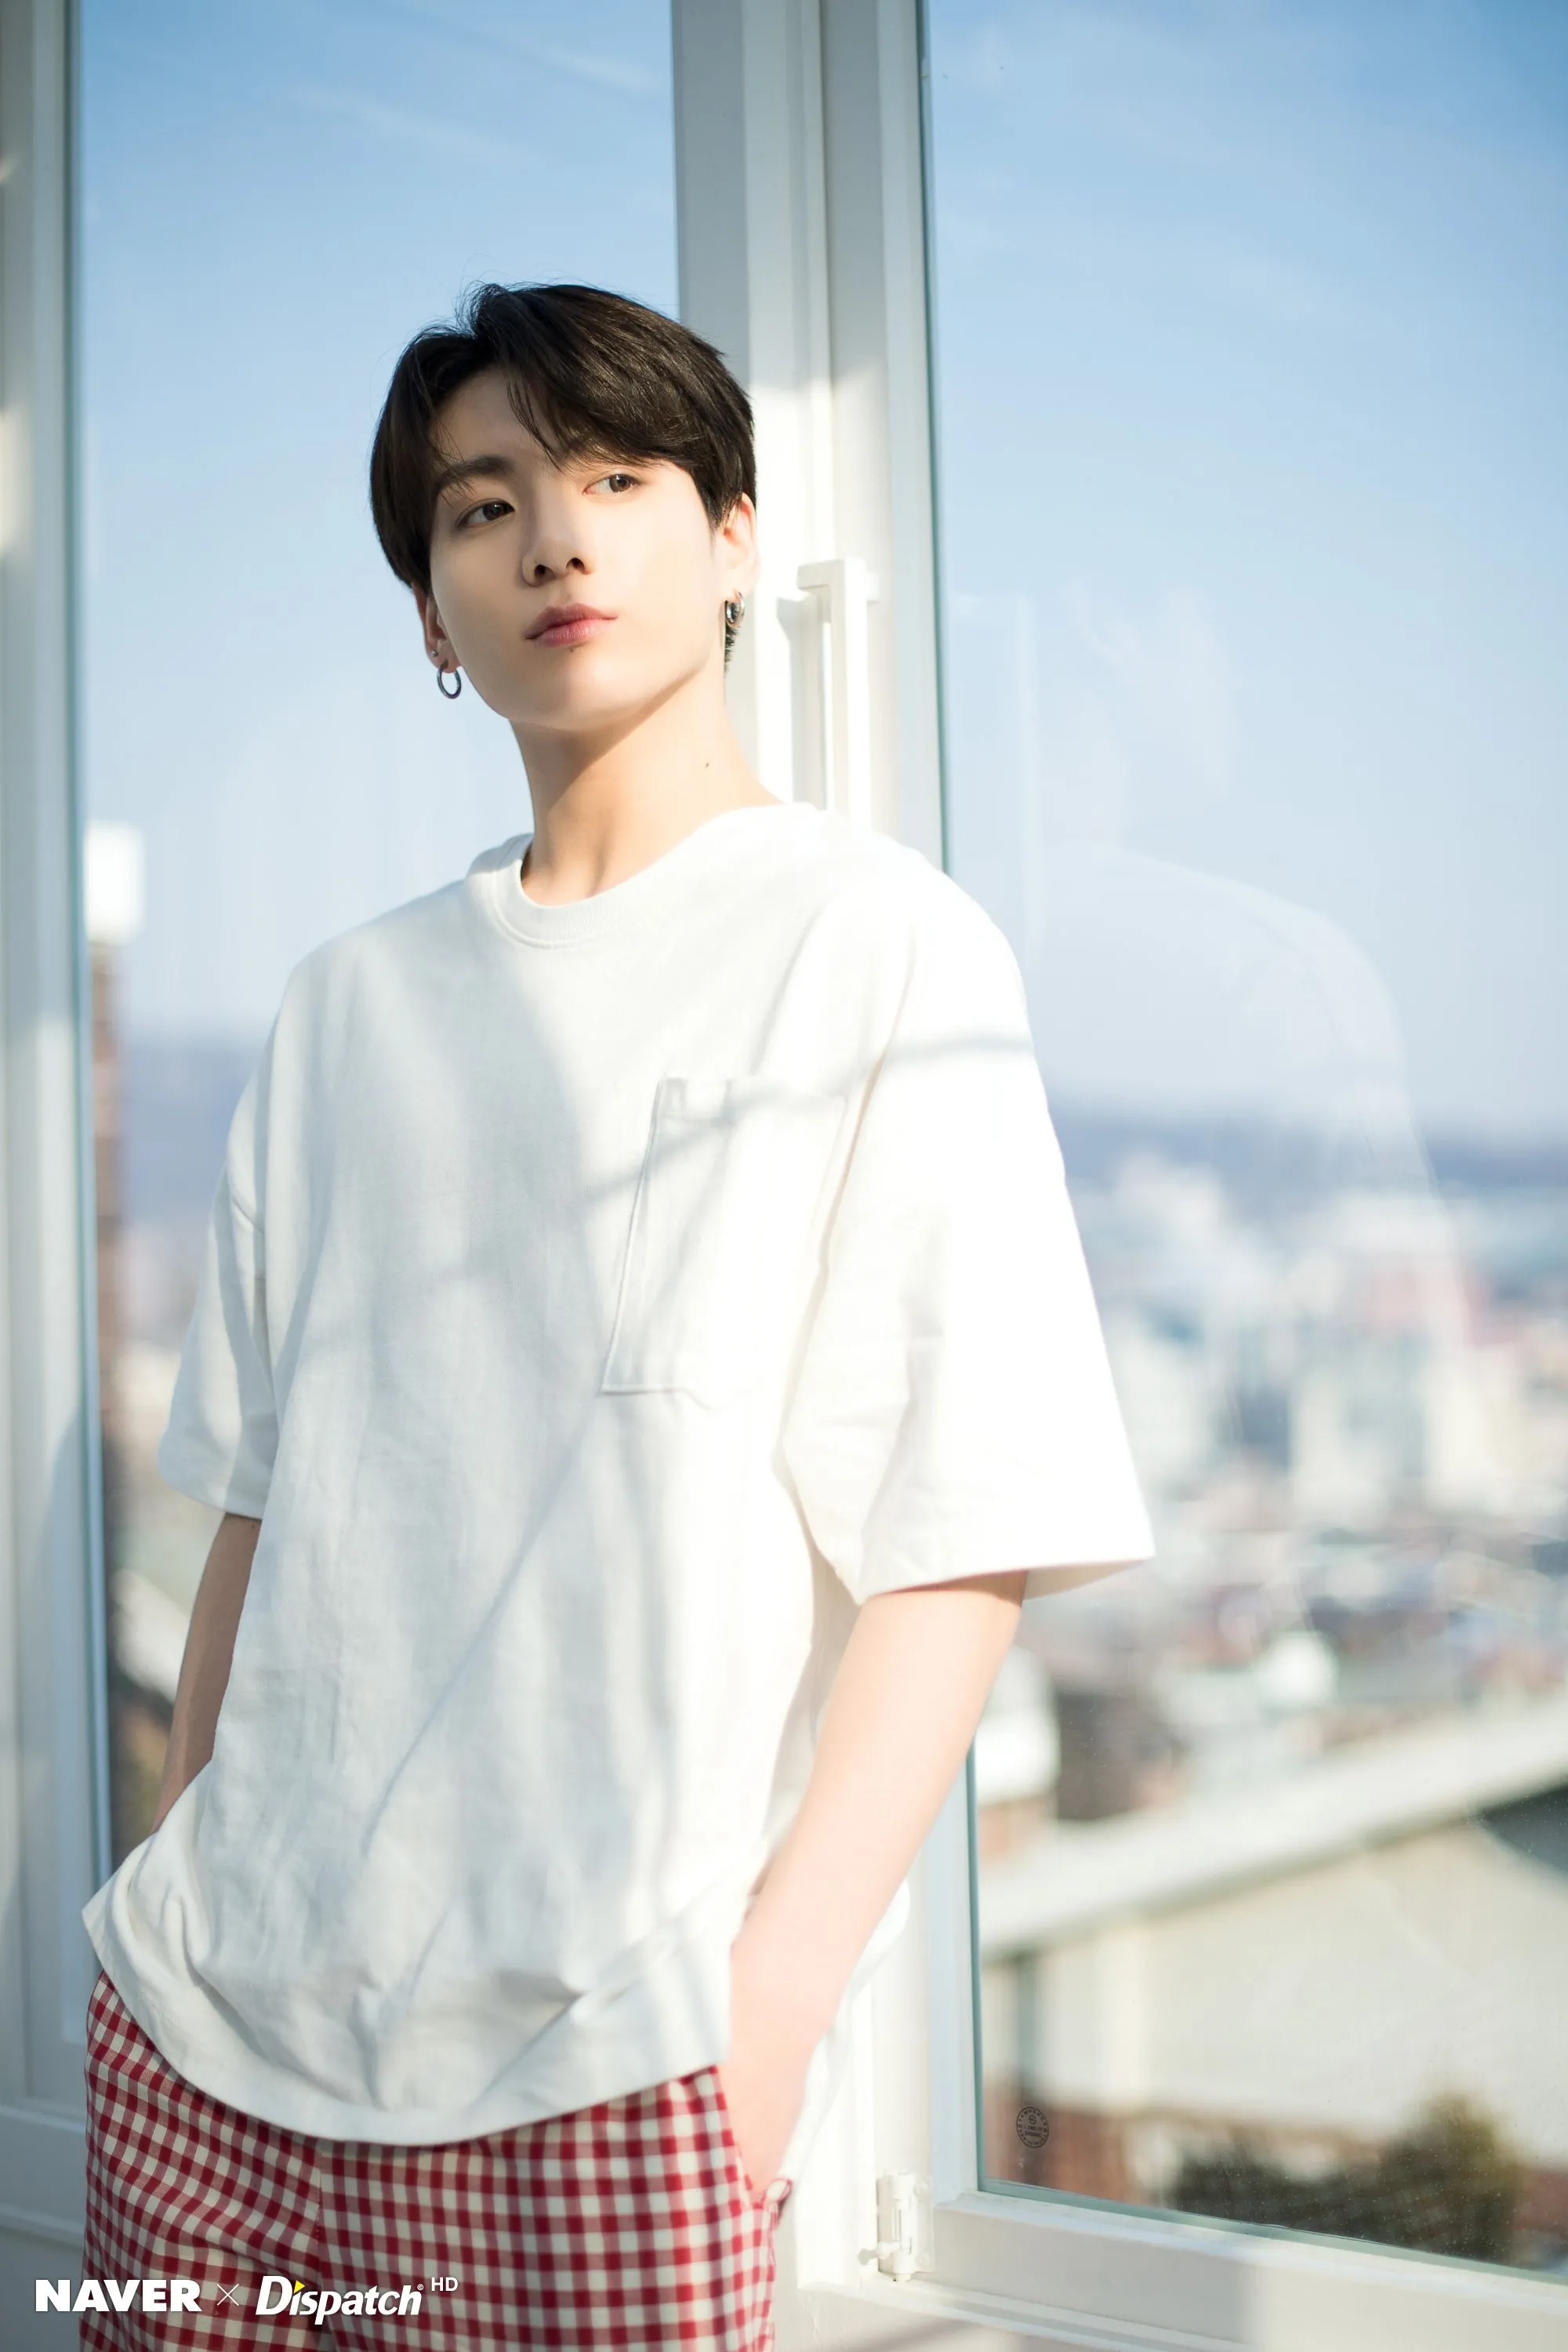 BTS' Jungkook - White Day special photo shoot by Naver x Dispatch